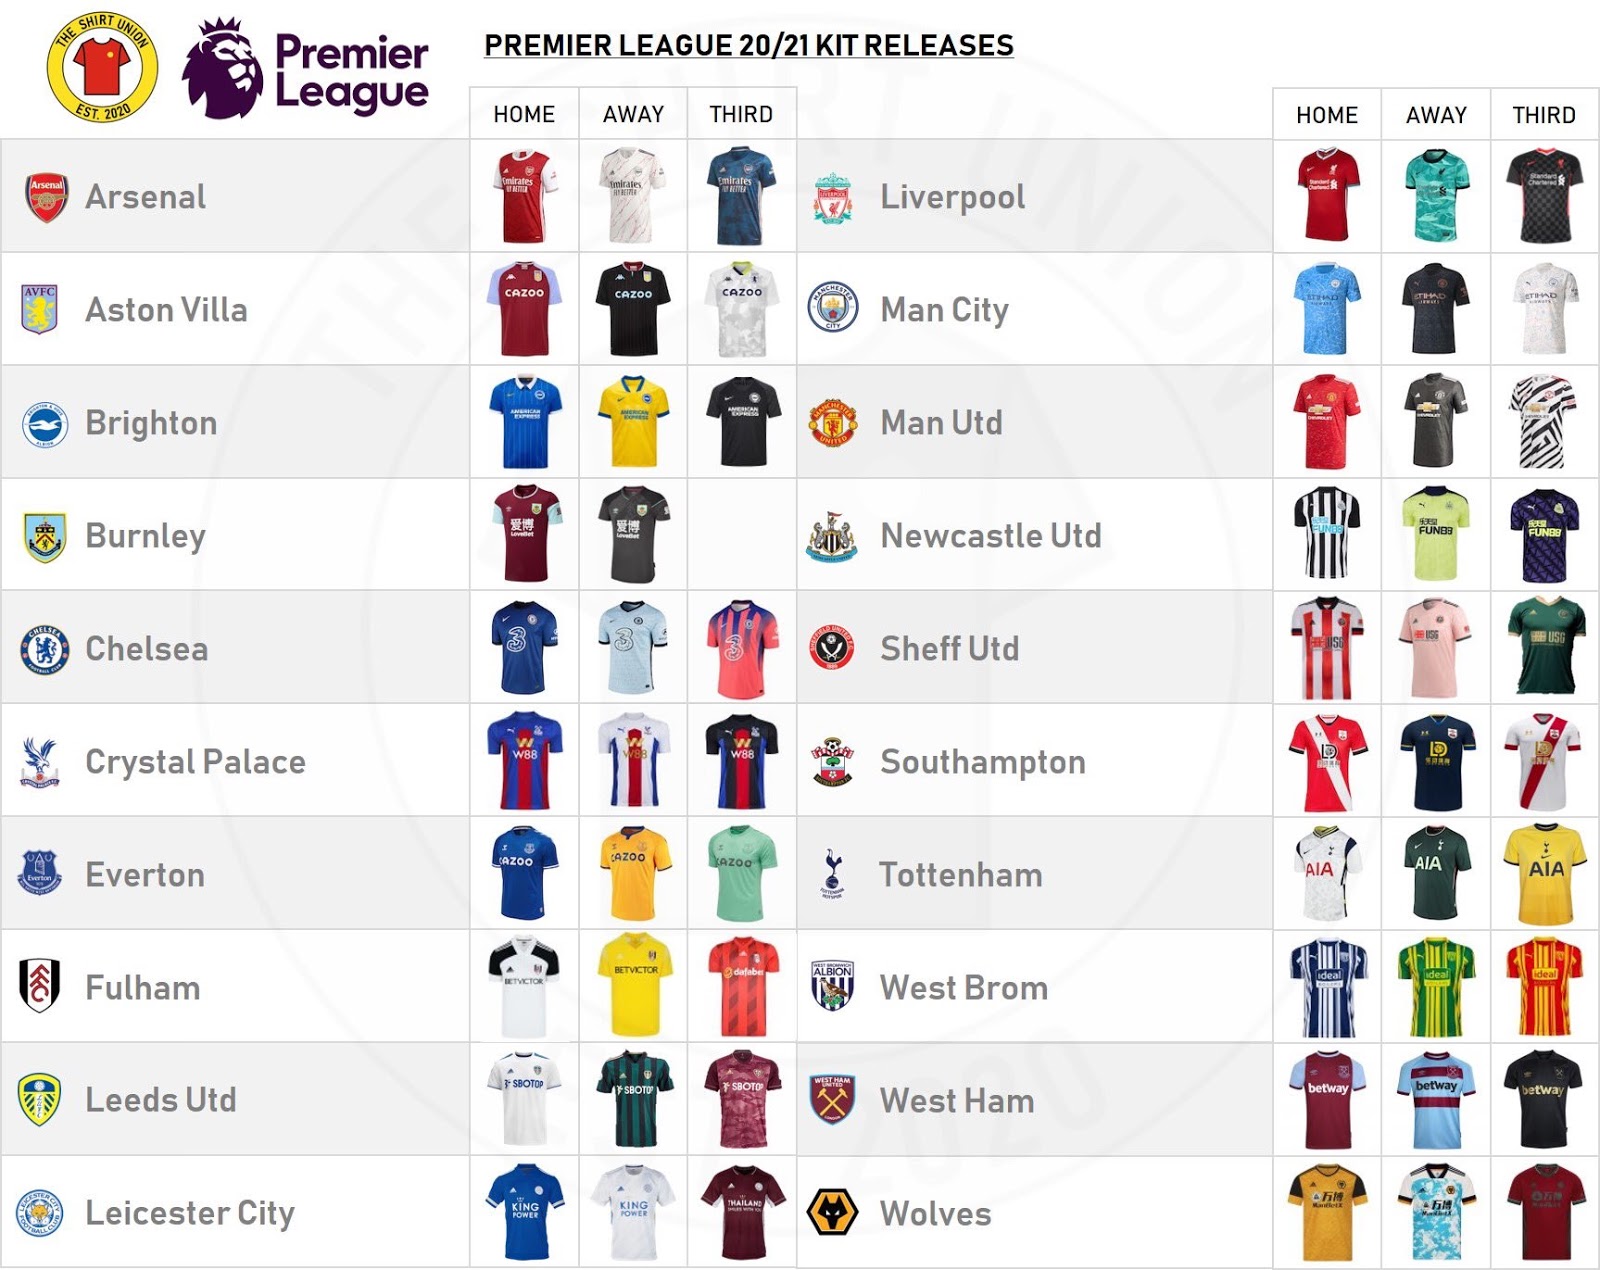 Entertainment onze zak All Premier League 20-21 Kits - Just 1 Of 60 Kits To Be Still Released -  Footy Headlines